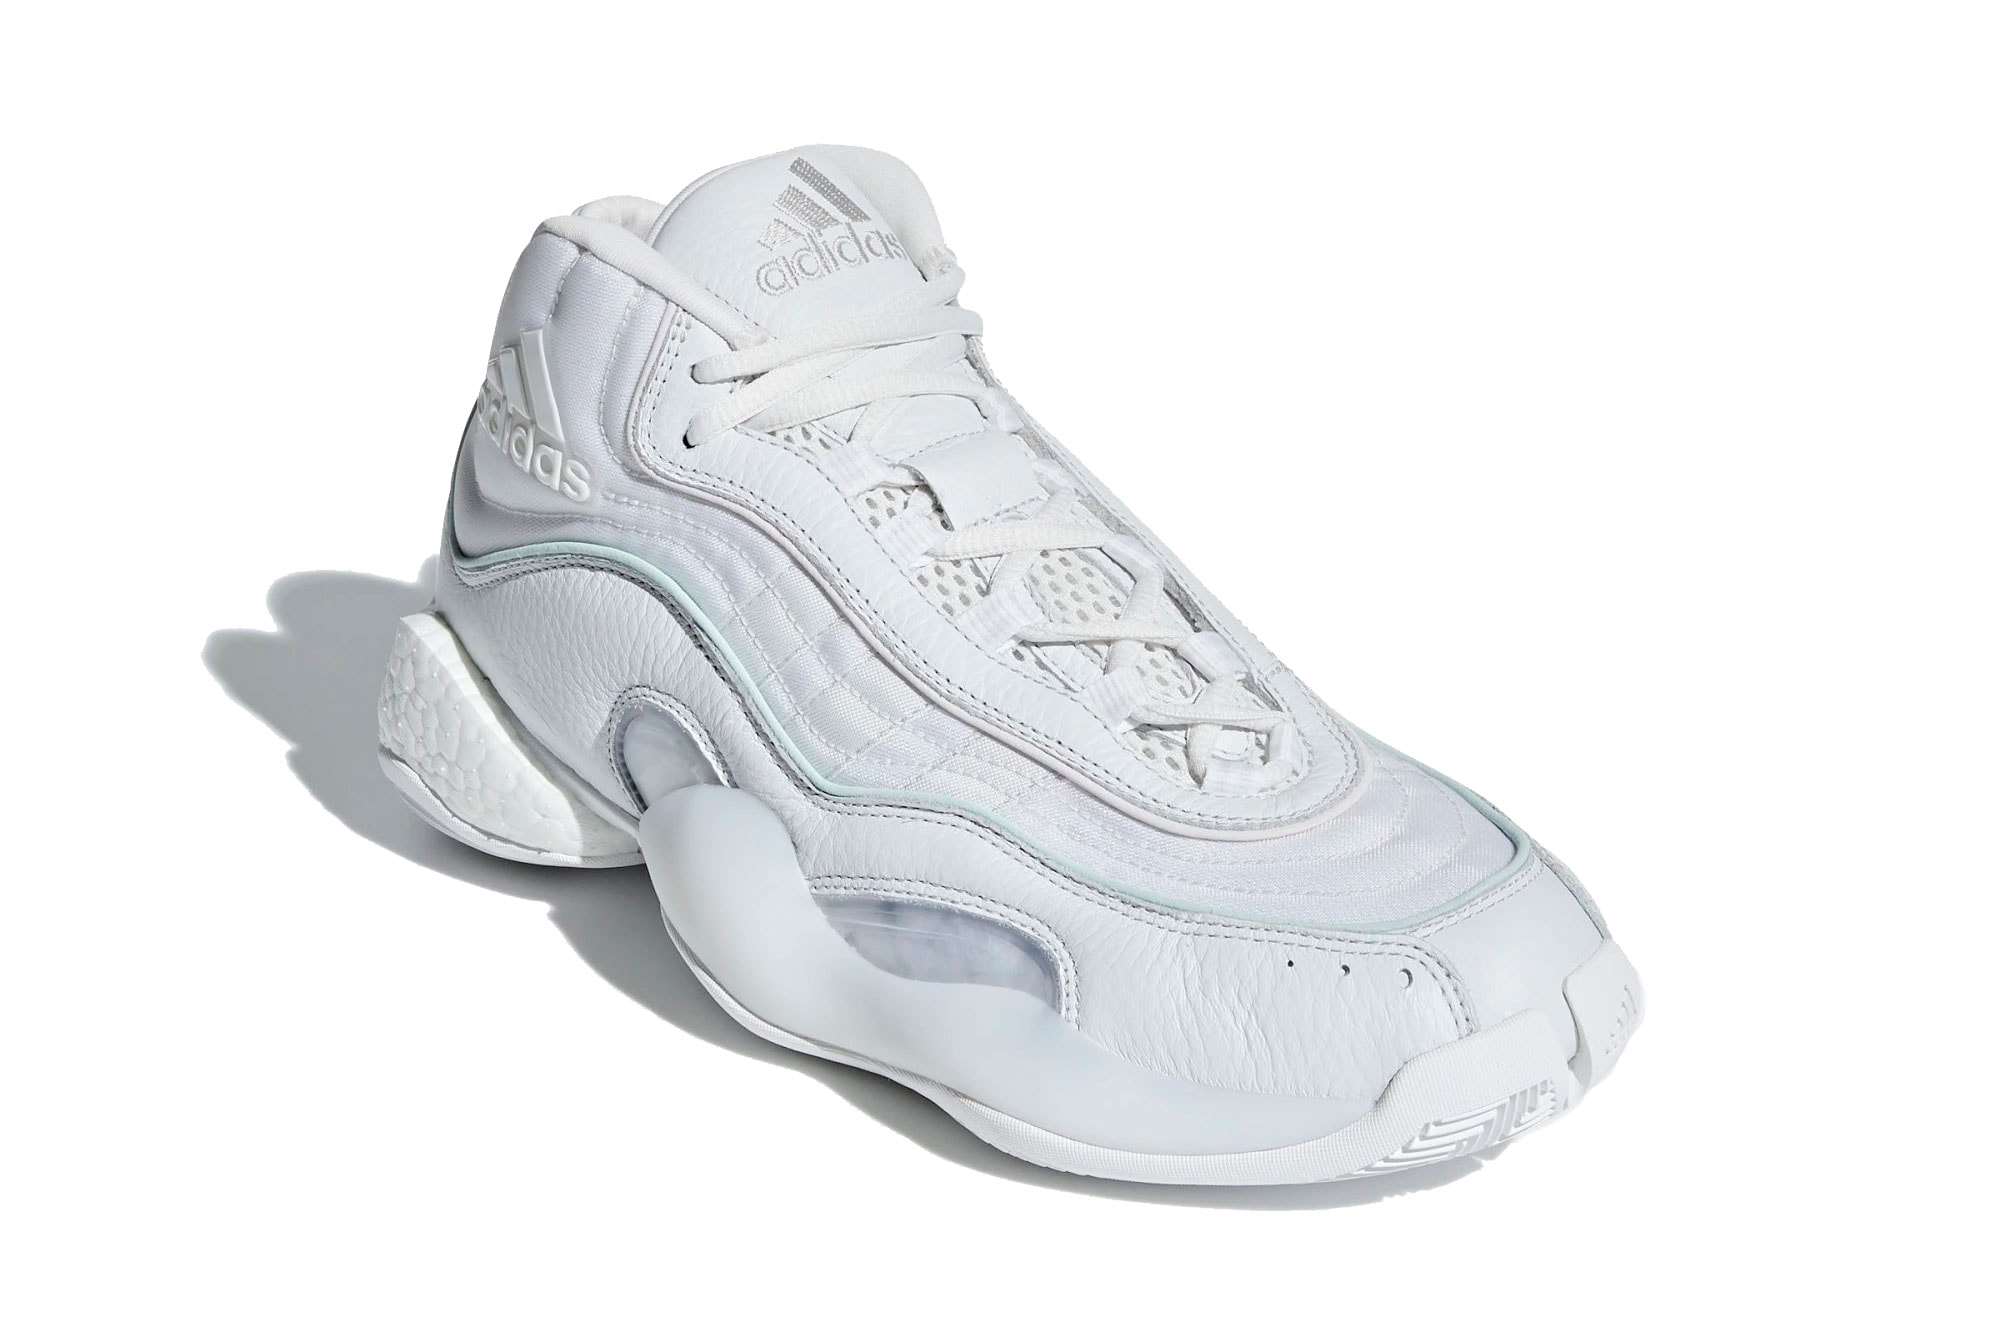 adidas 98 crazy byw crystal white cloud white running white 2018 november footwear